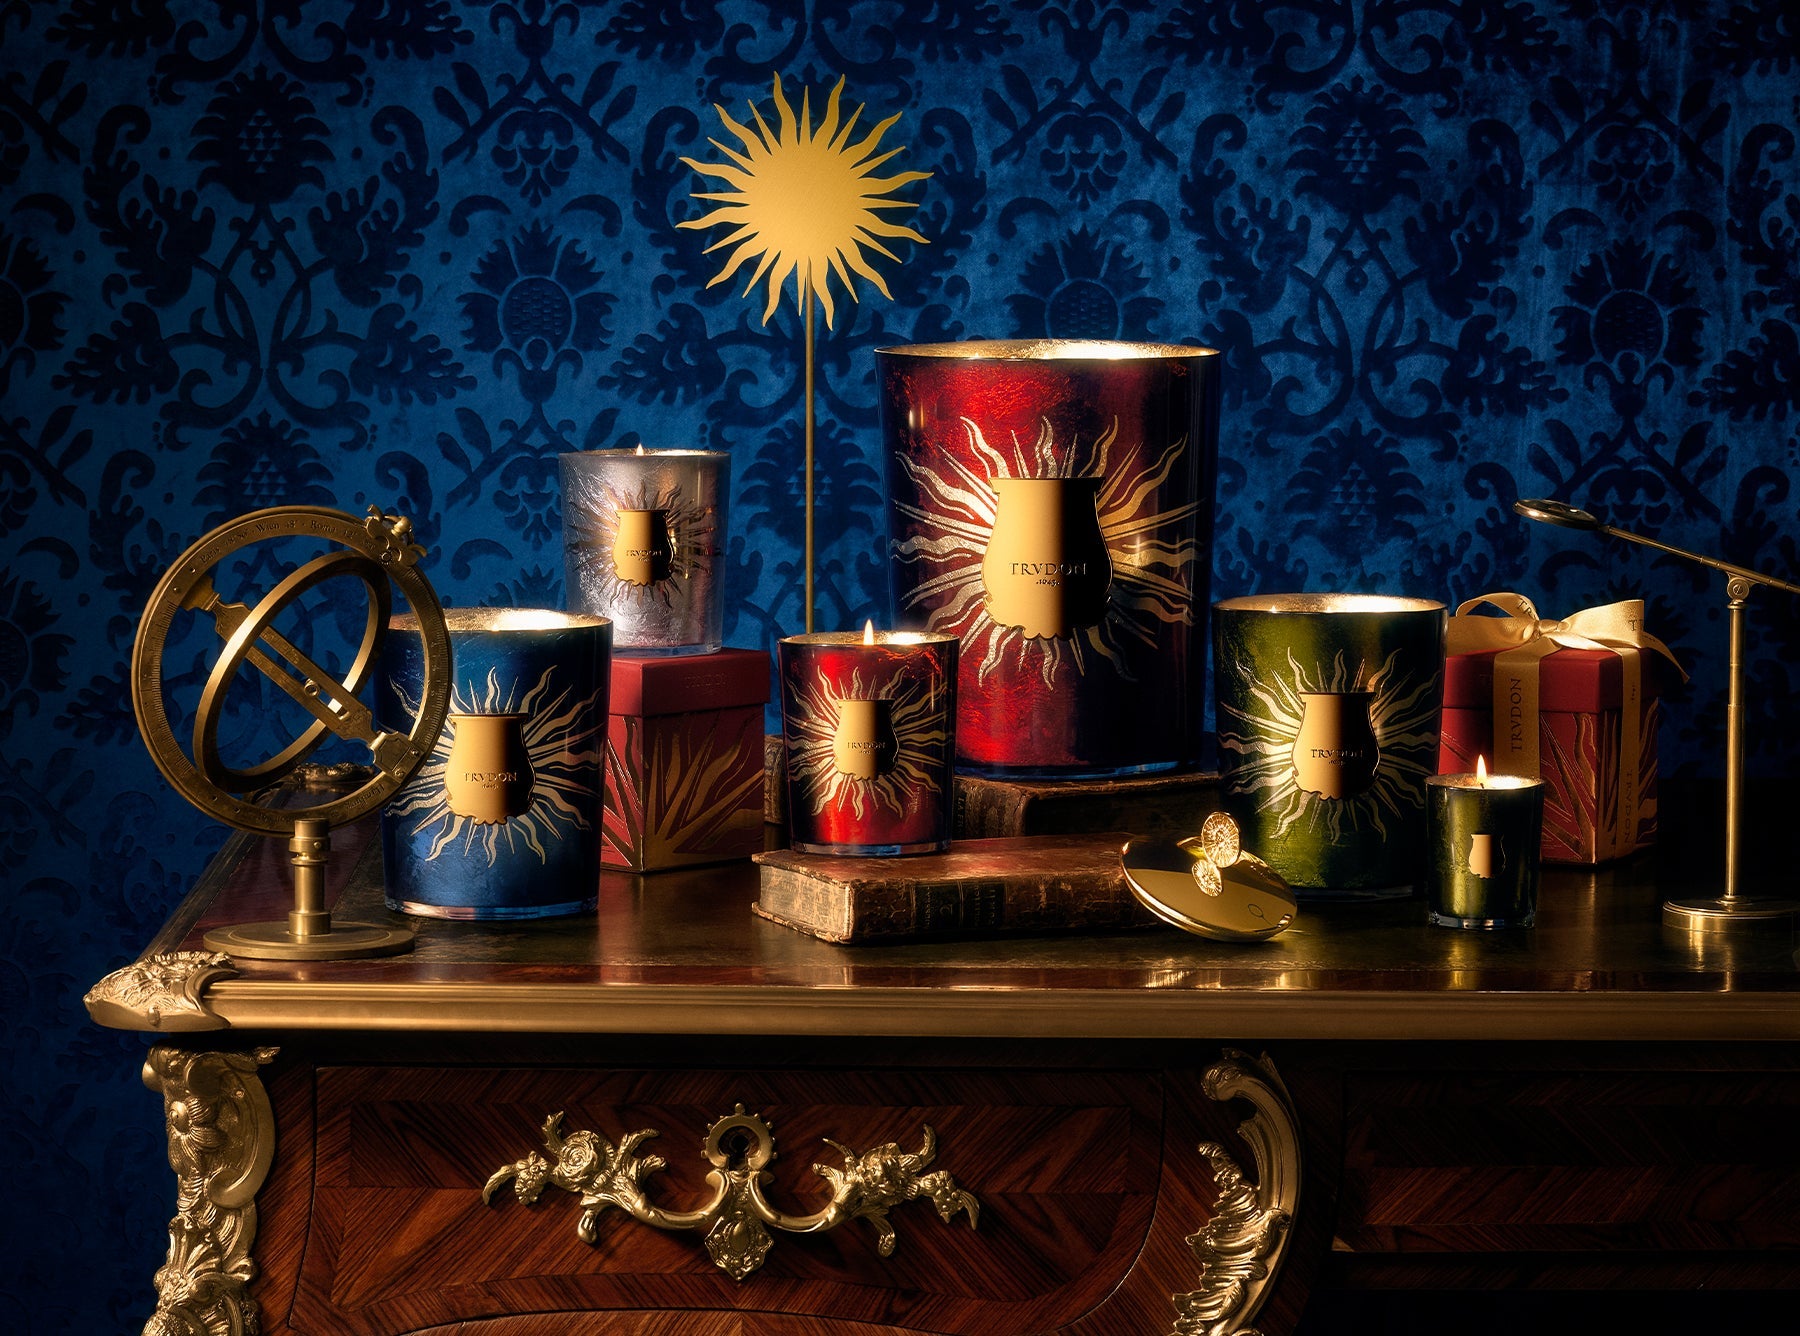 Christmas Limited Edition Astral Fir Candle by Trudon, 270g